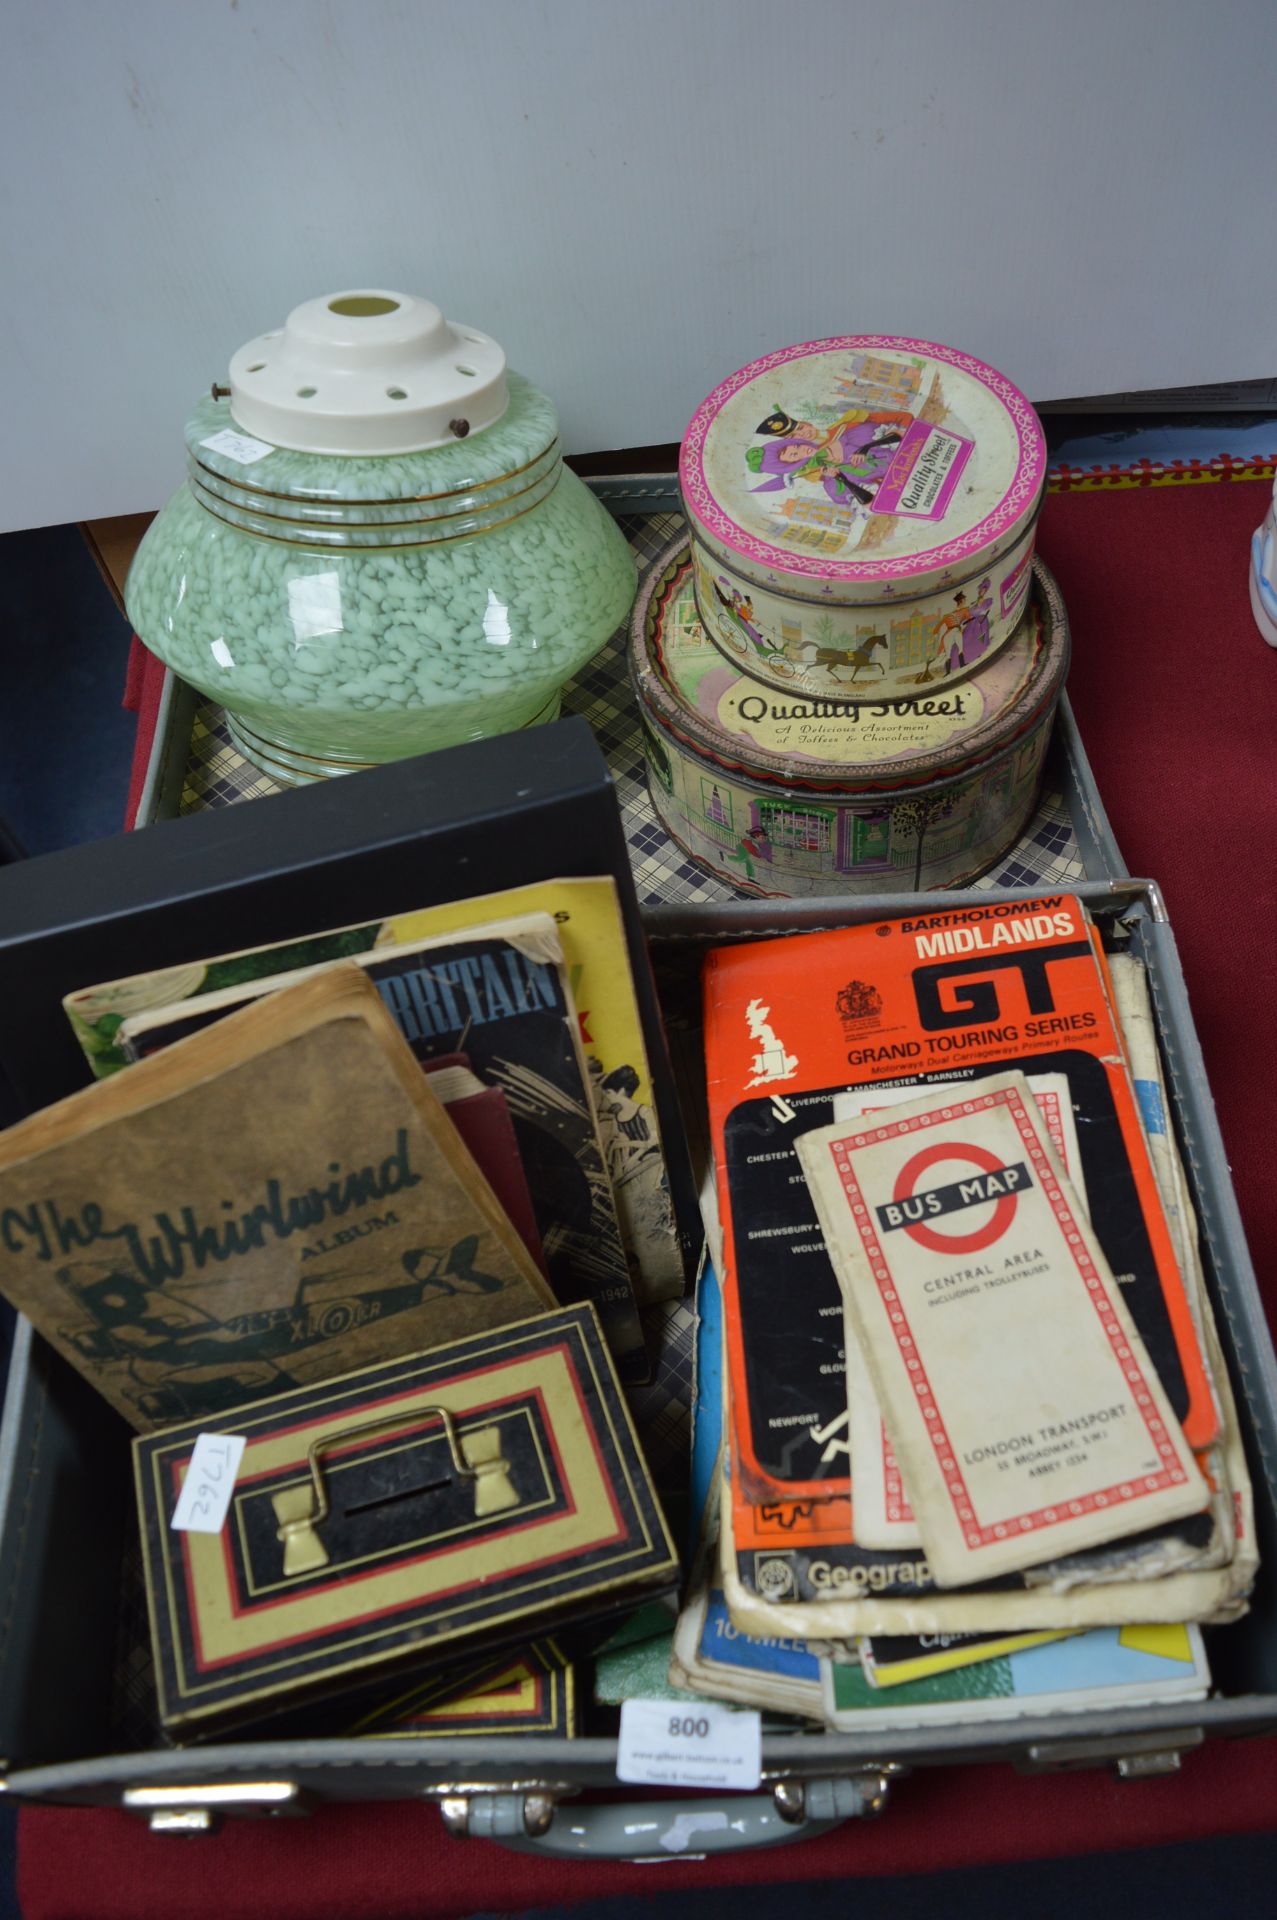 Small Vintage Case and Contents, Glass Lamp Shade, Old Tins, George Best Fragrance Set, etc.